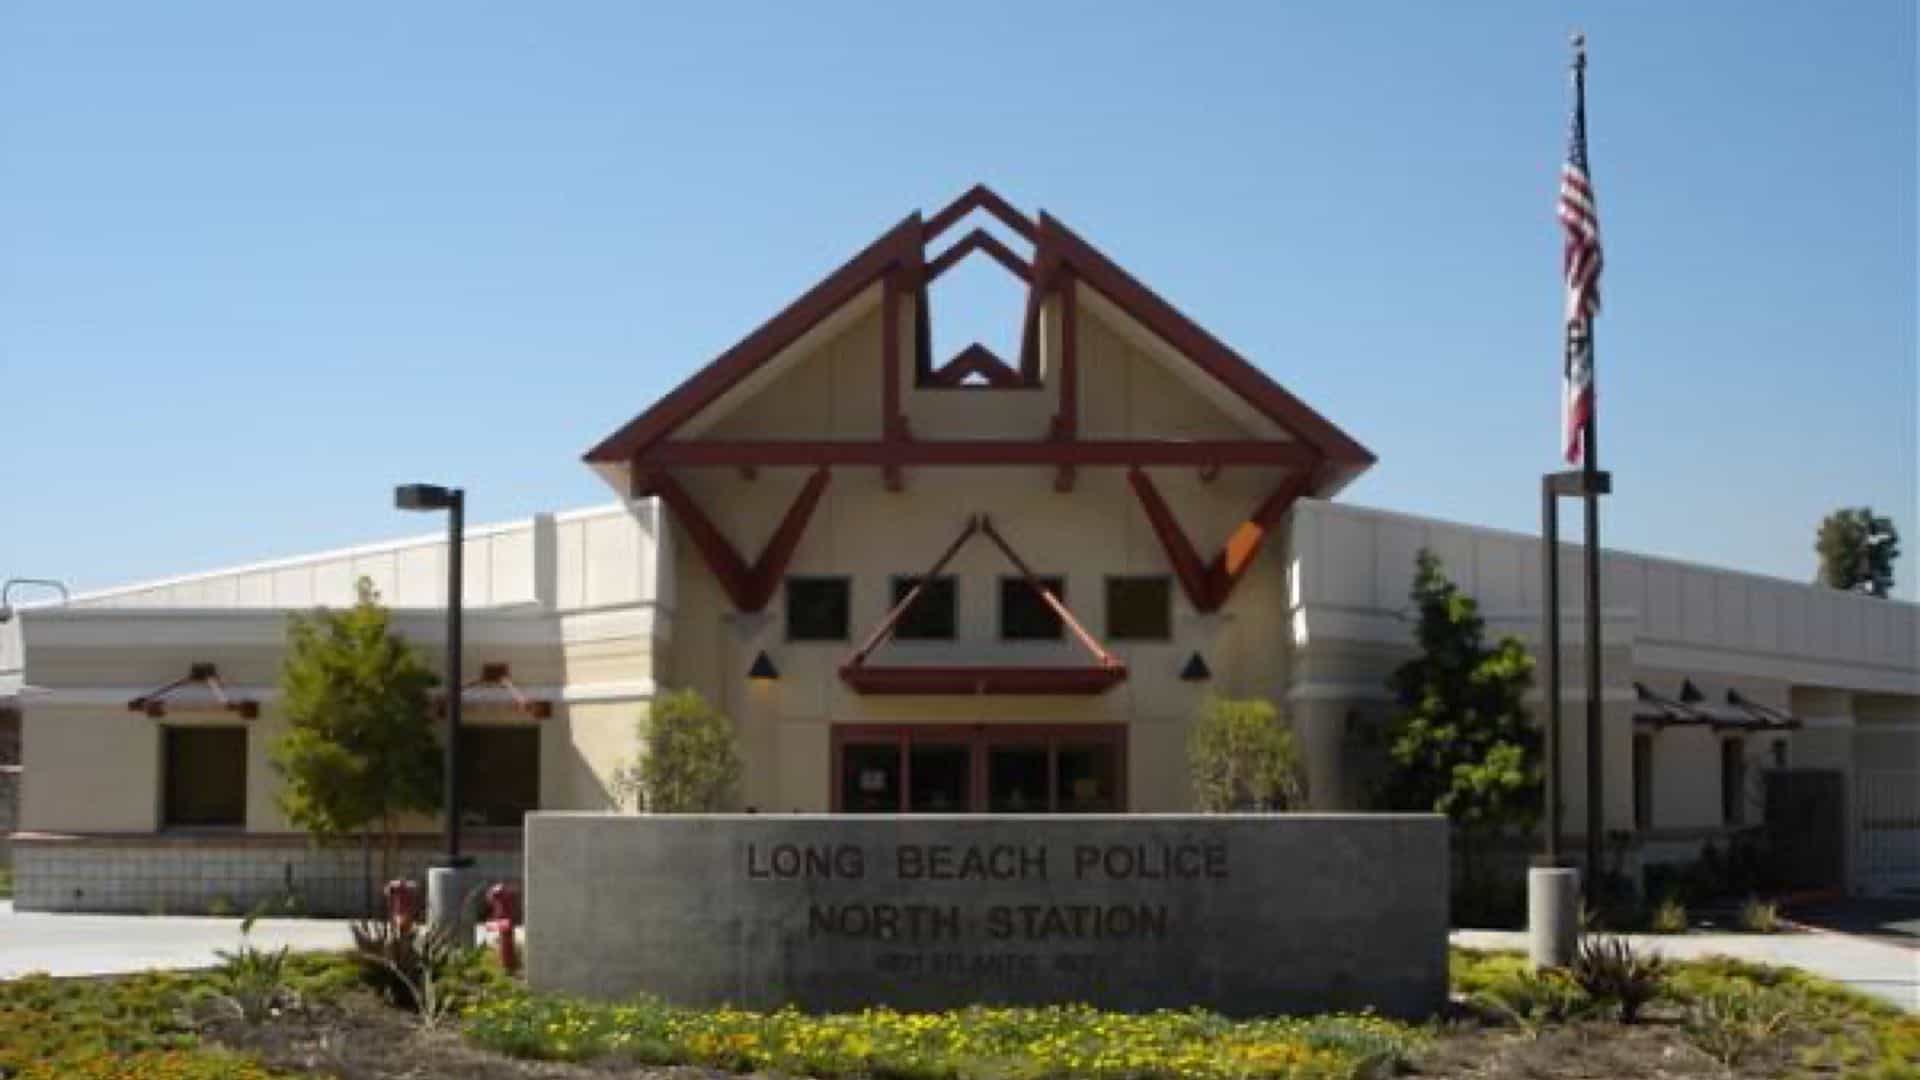 North Division Police department building, Long Beach, CA